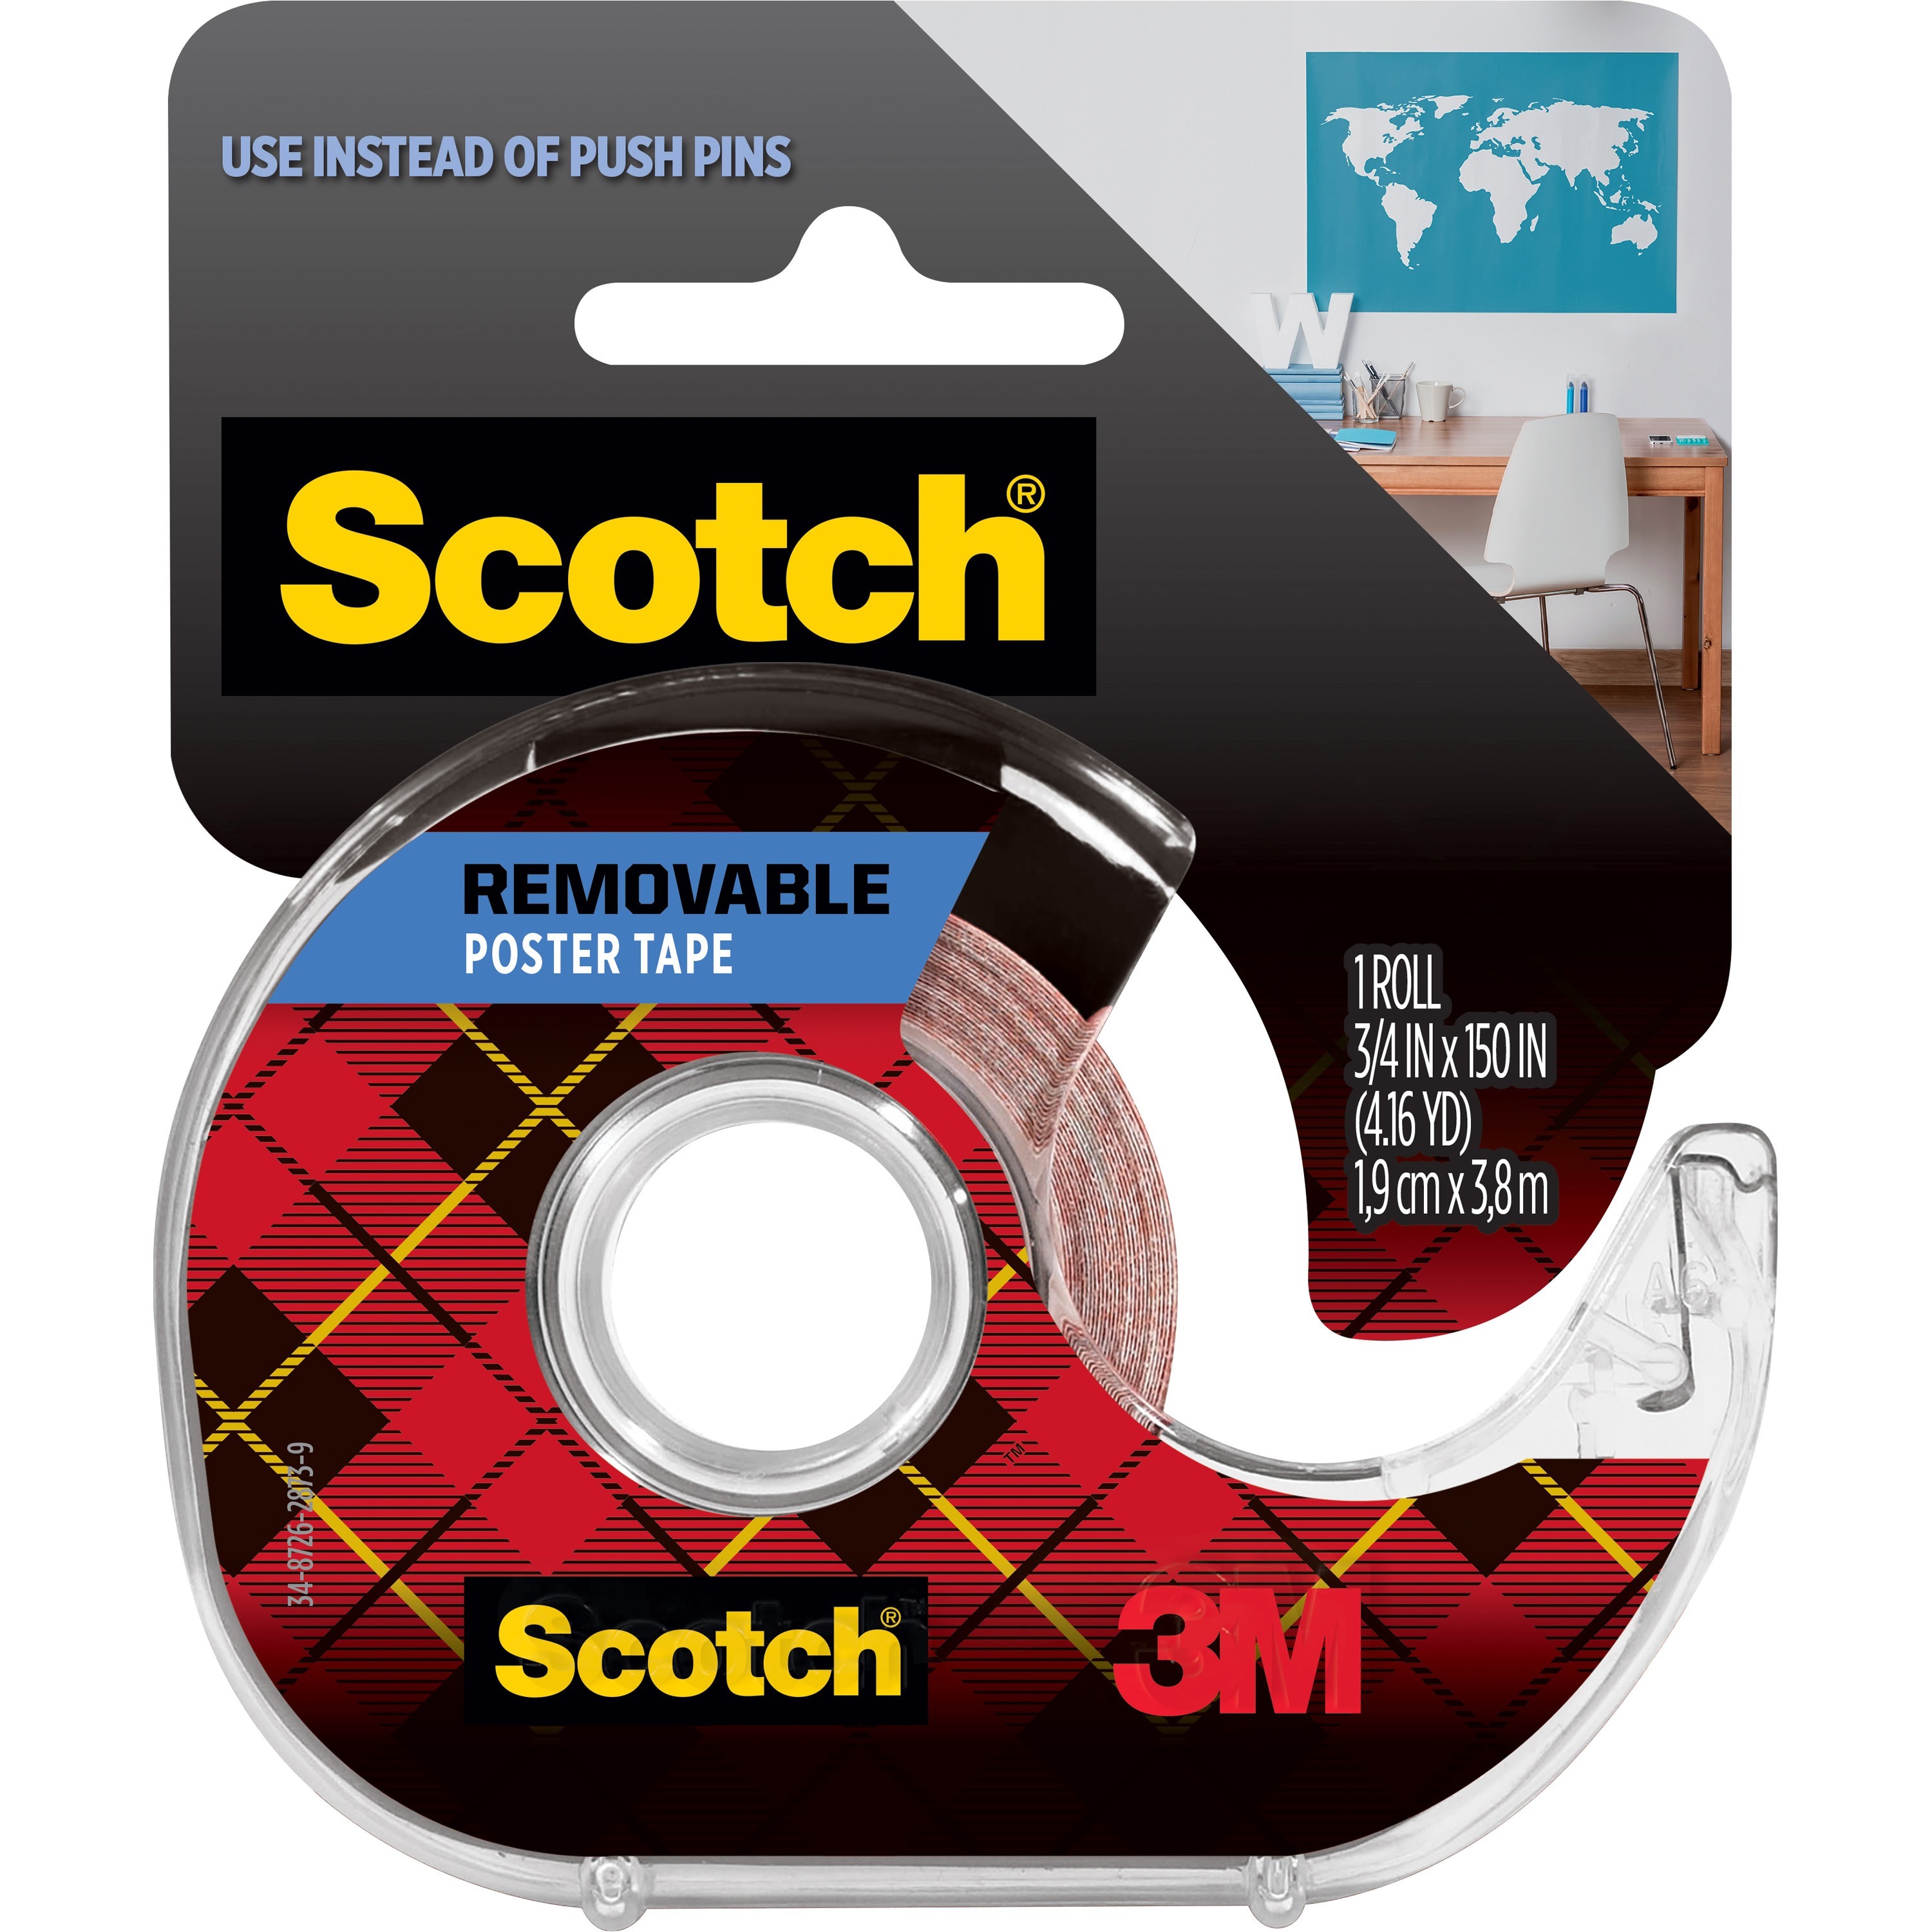 Scotch Removable Poster Tape 12.50 ft Length x 0.75 Width